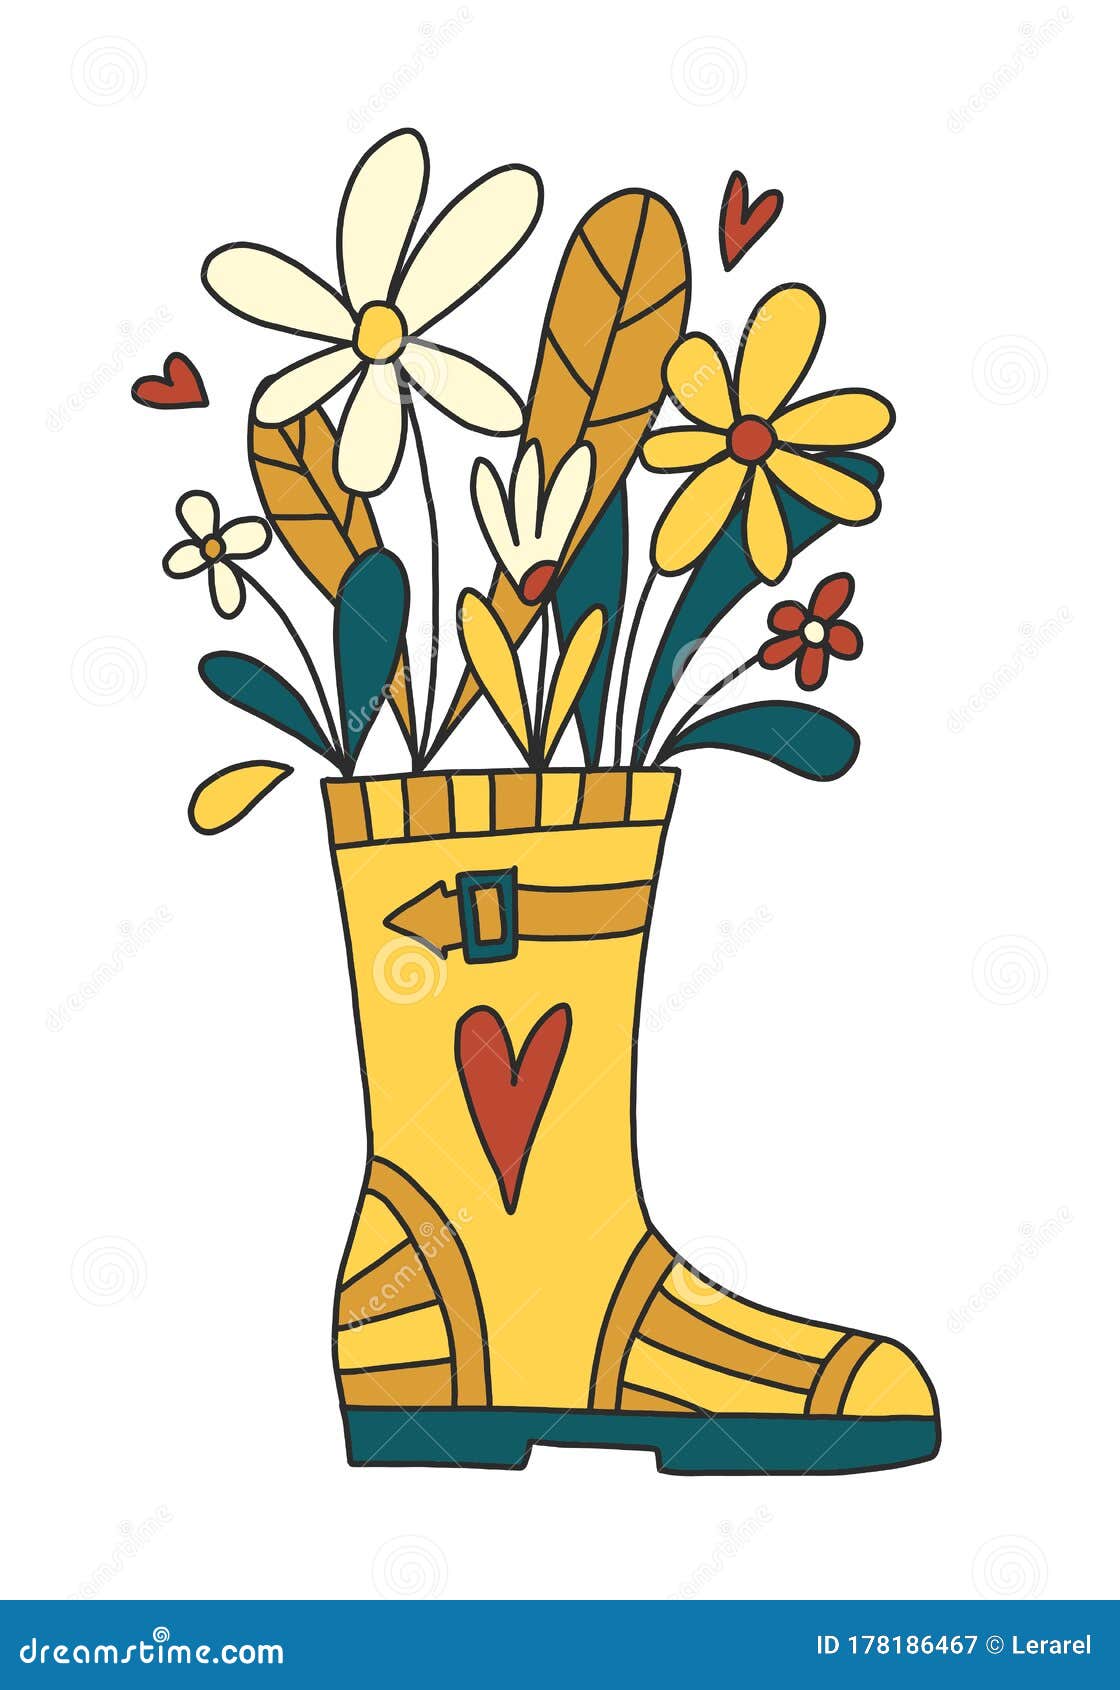 Vector Illustration of a Rubber Boot with Flowers. Colorful ...